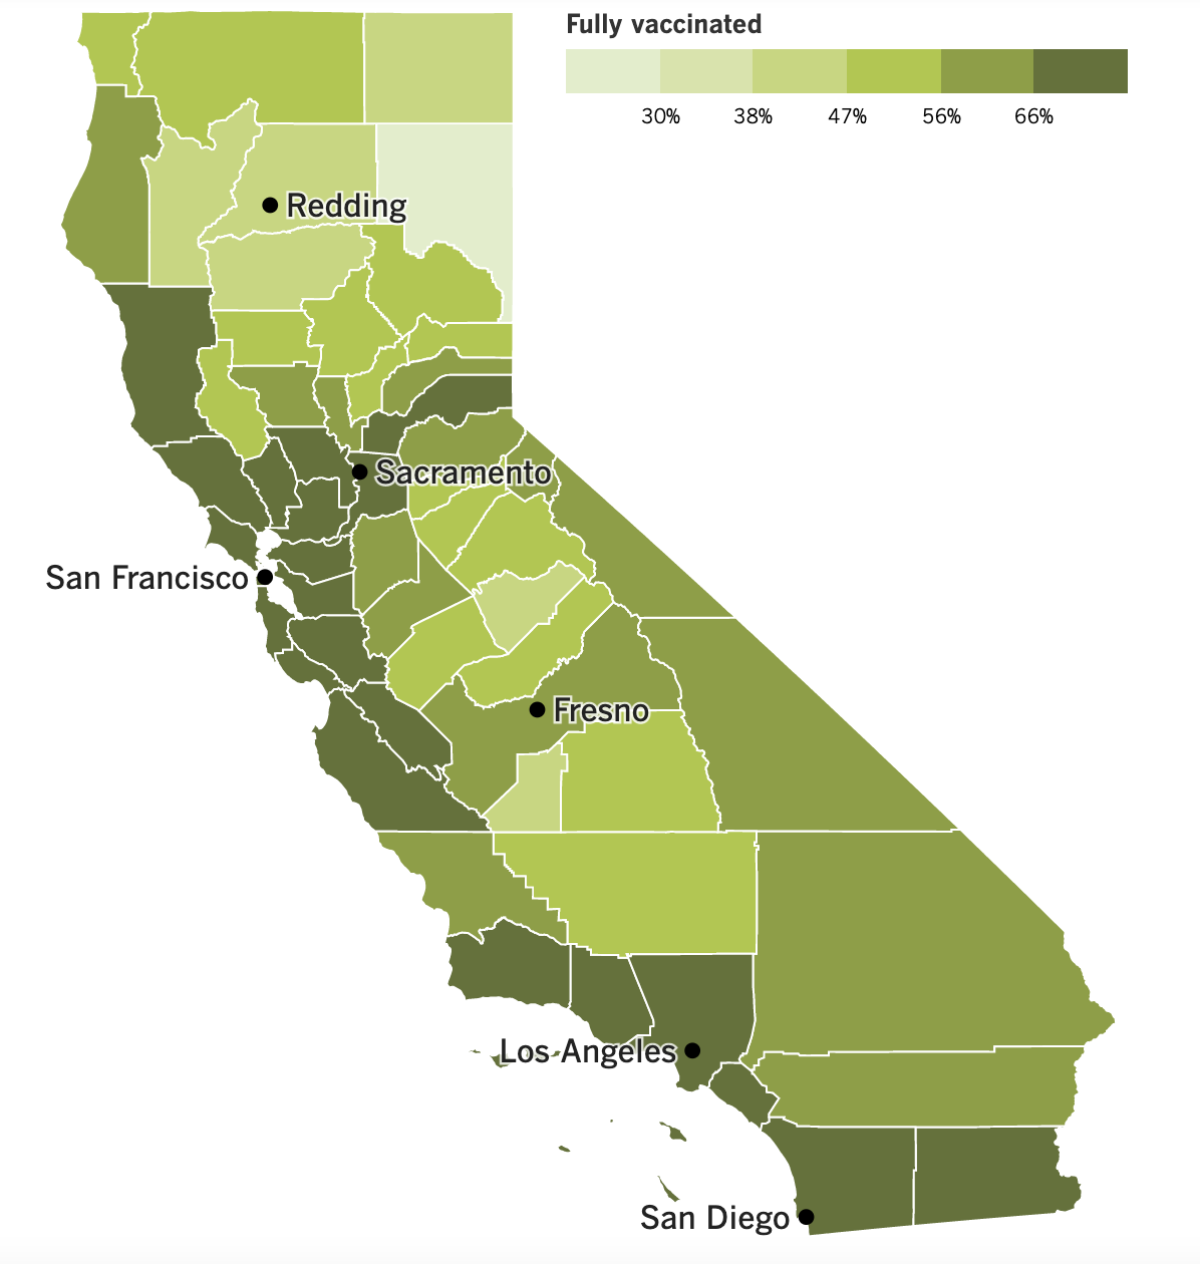 A map showing California's COVID-19 vaccination progress by county as of Feb. 15.